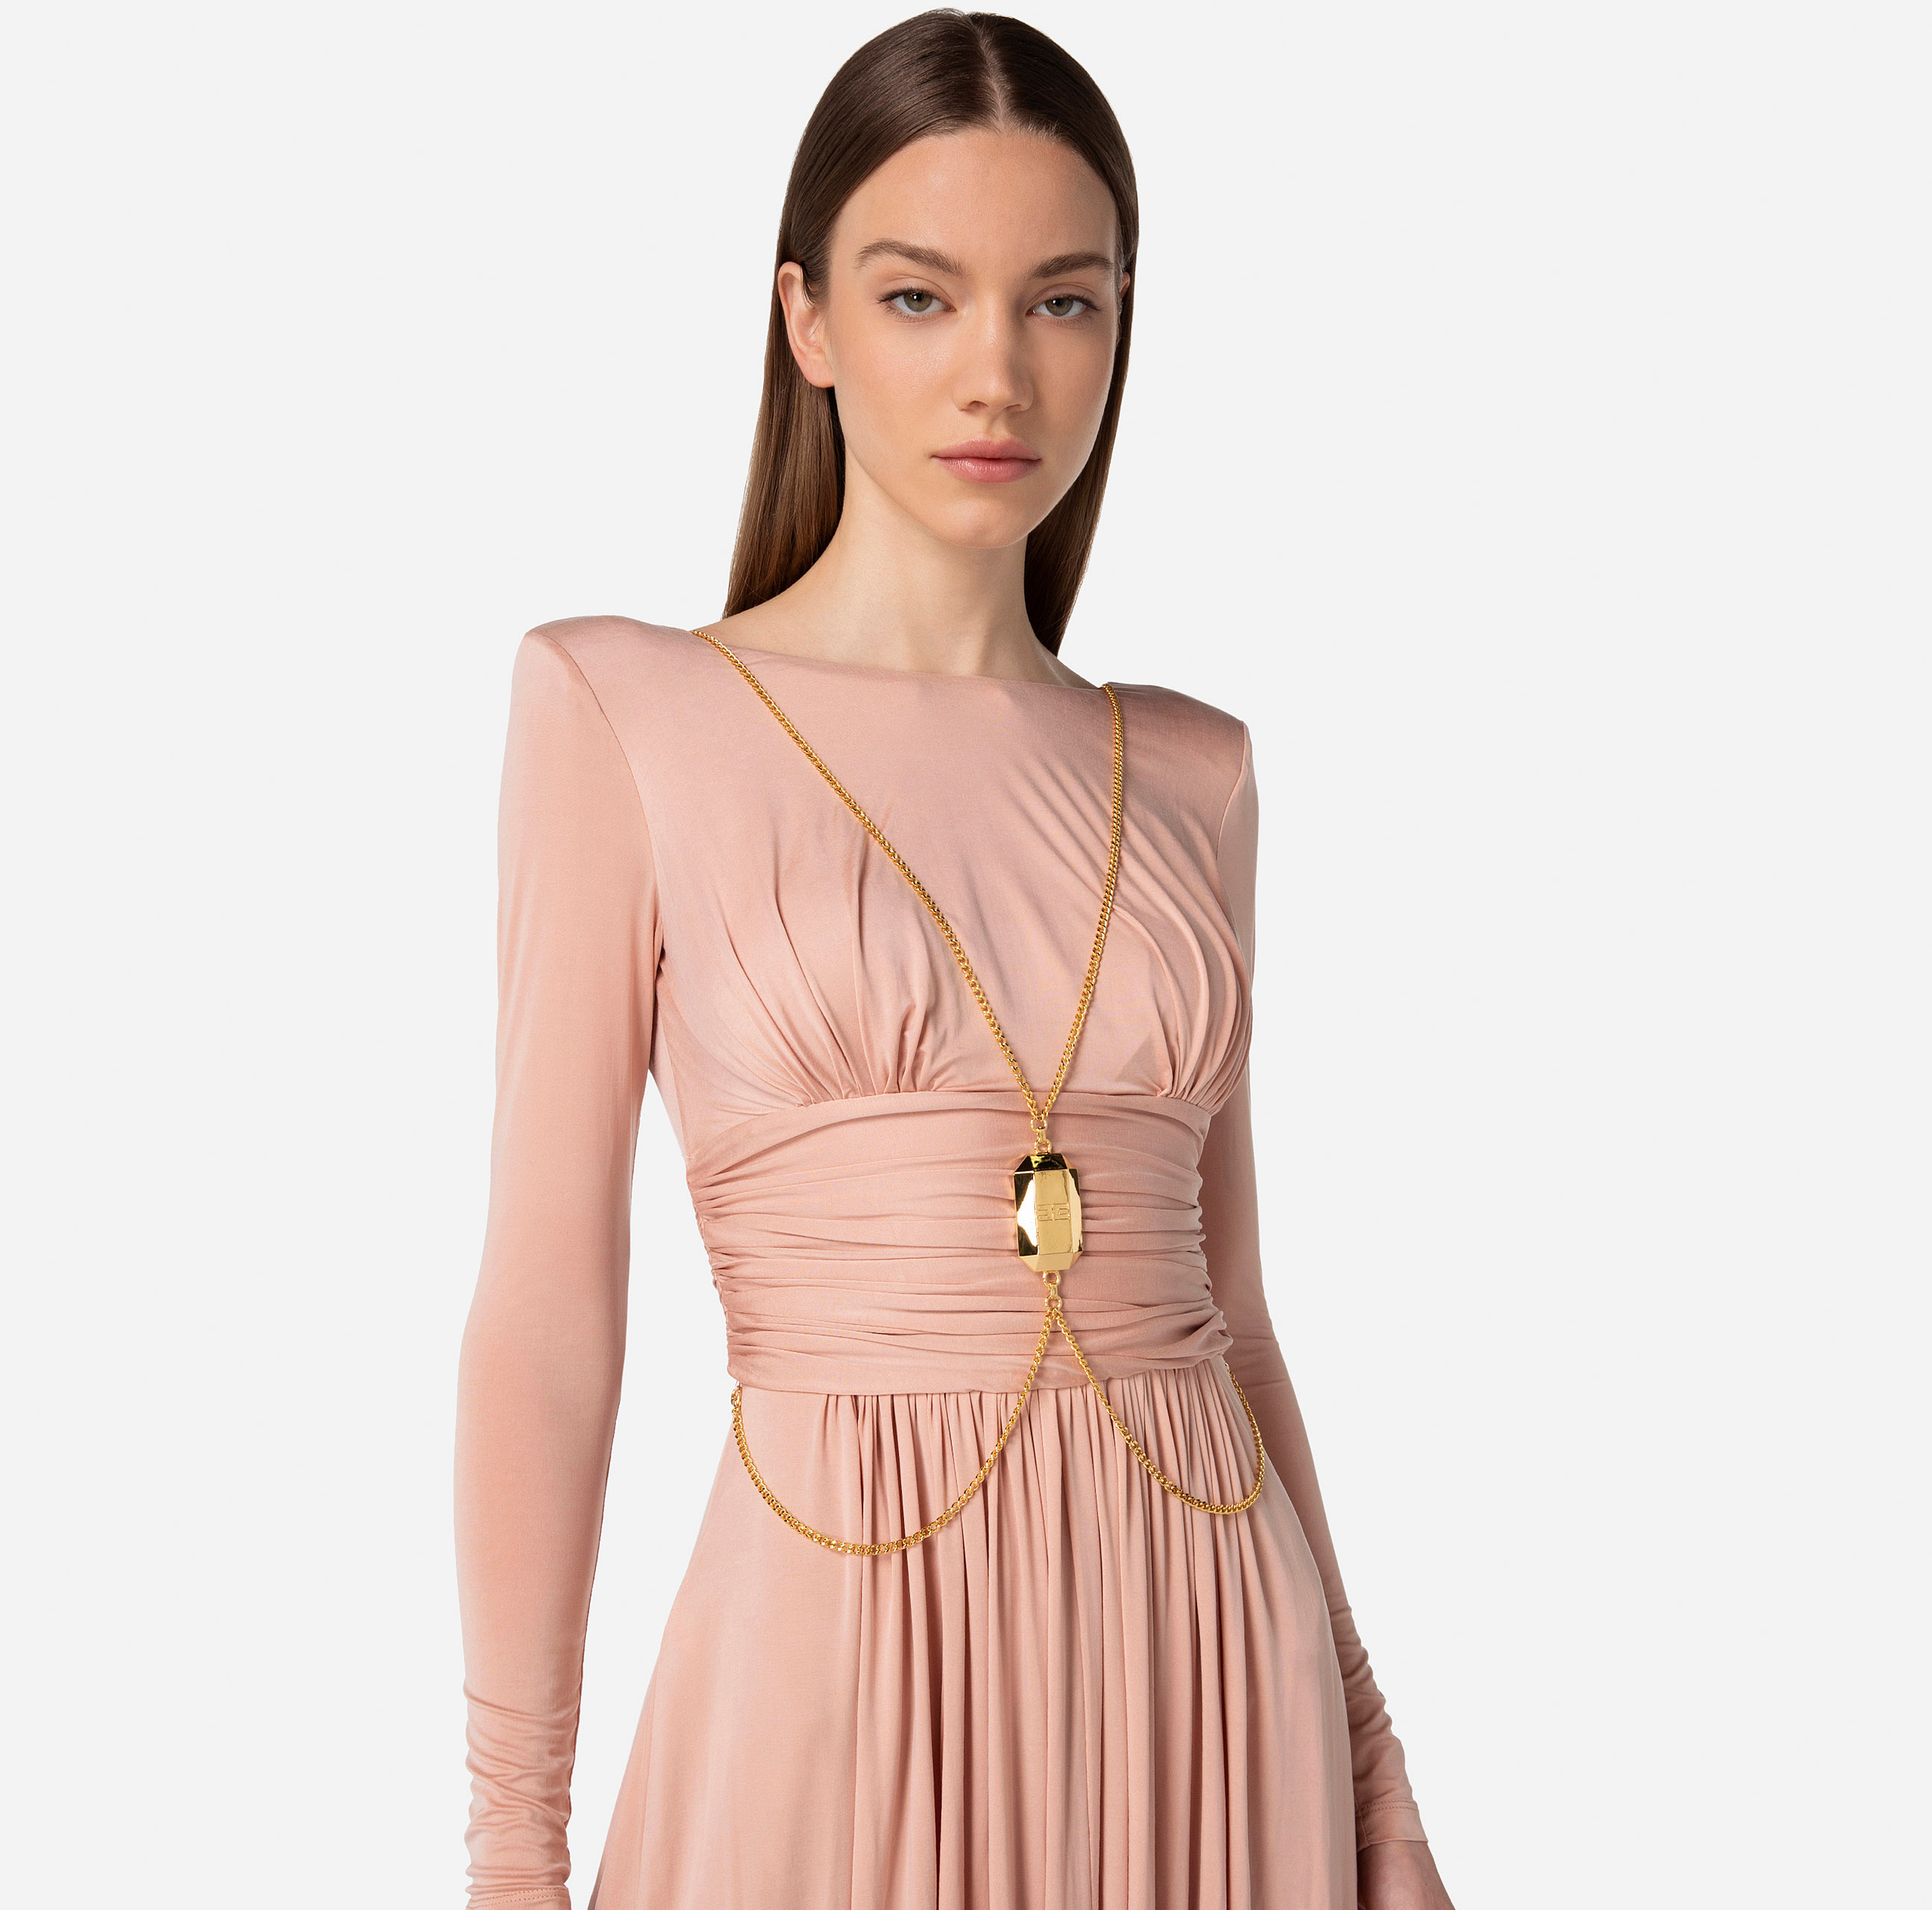 Red Carpet dress in jersey with accessory - Elisabetta Franchi